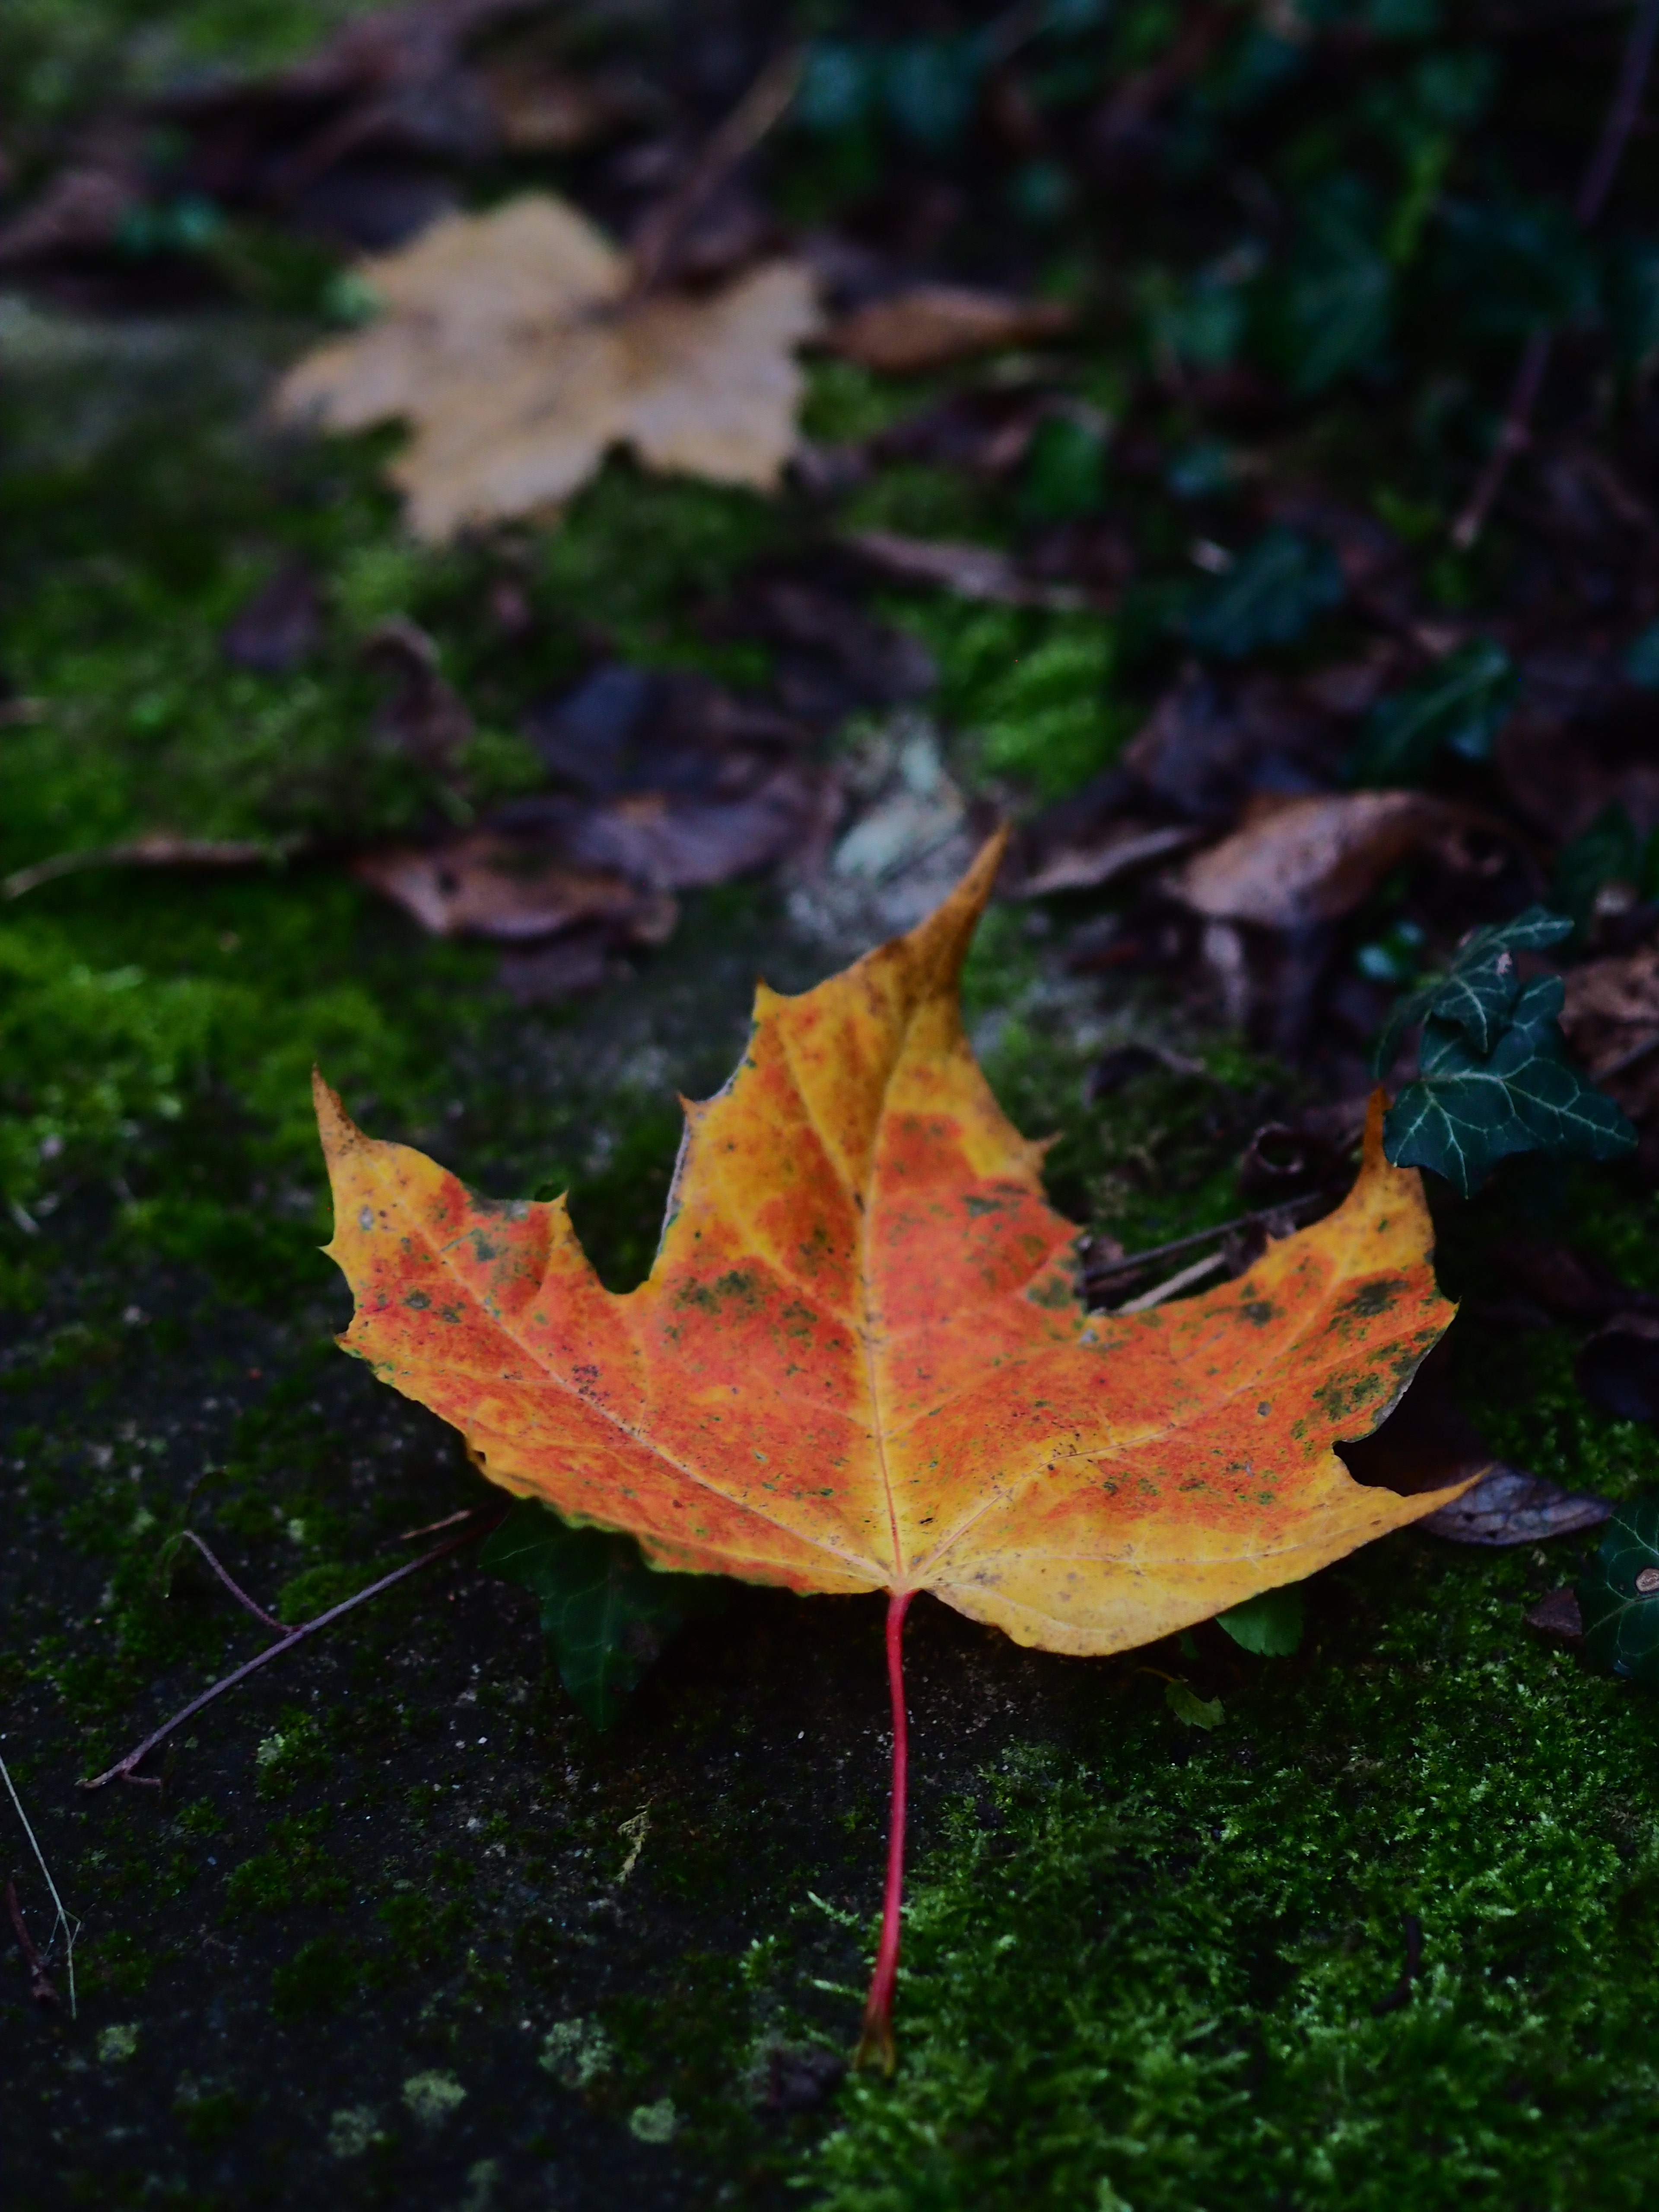 Download wallpaper 3840x5120 maple, leaf, dry, moss, macro hd background